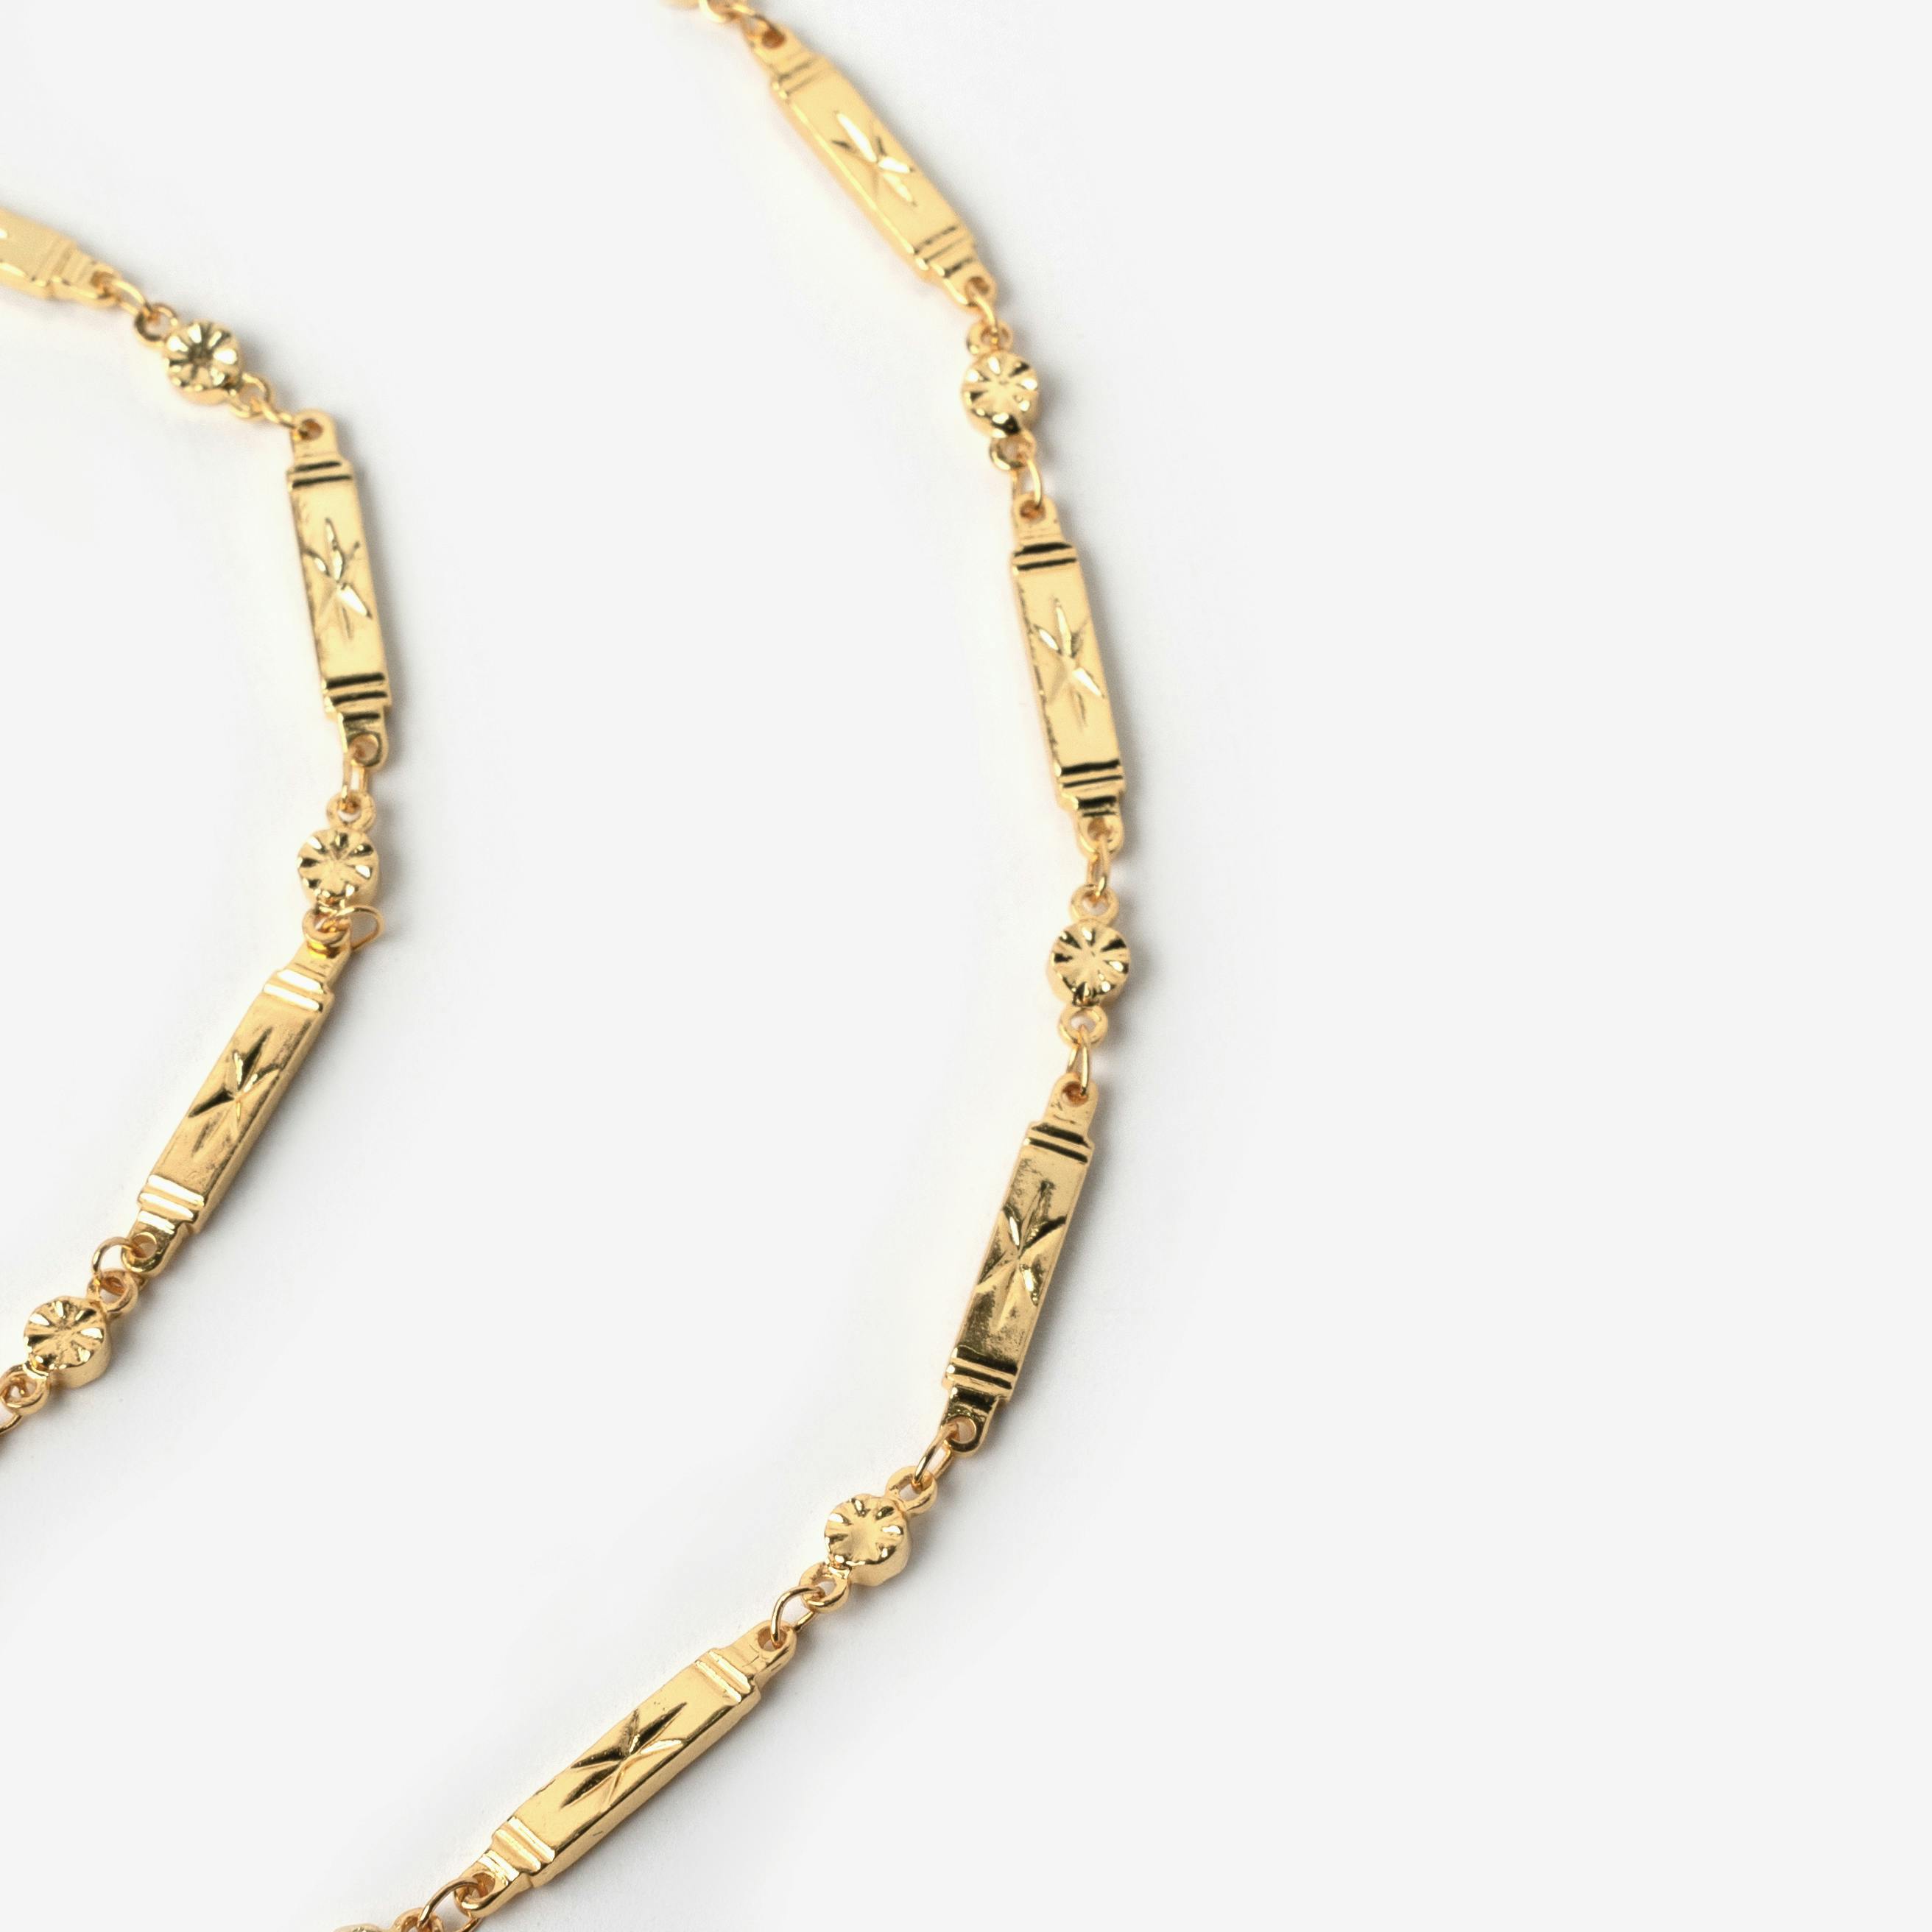 CELESTIAL LINK NECKLACE GOLD TONE , a product by Equiivalence